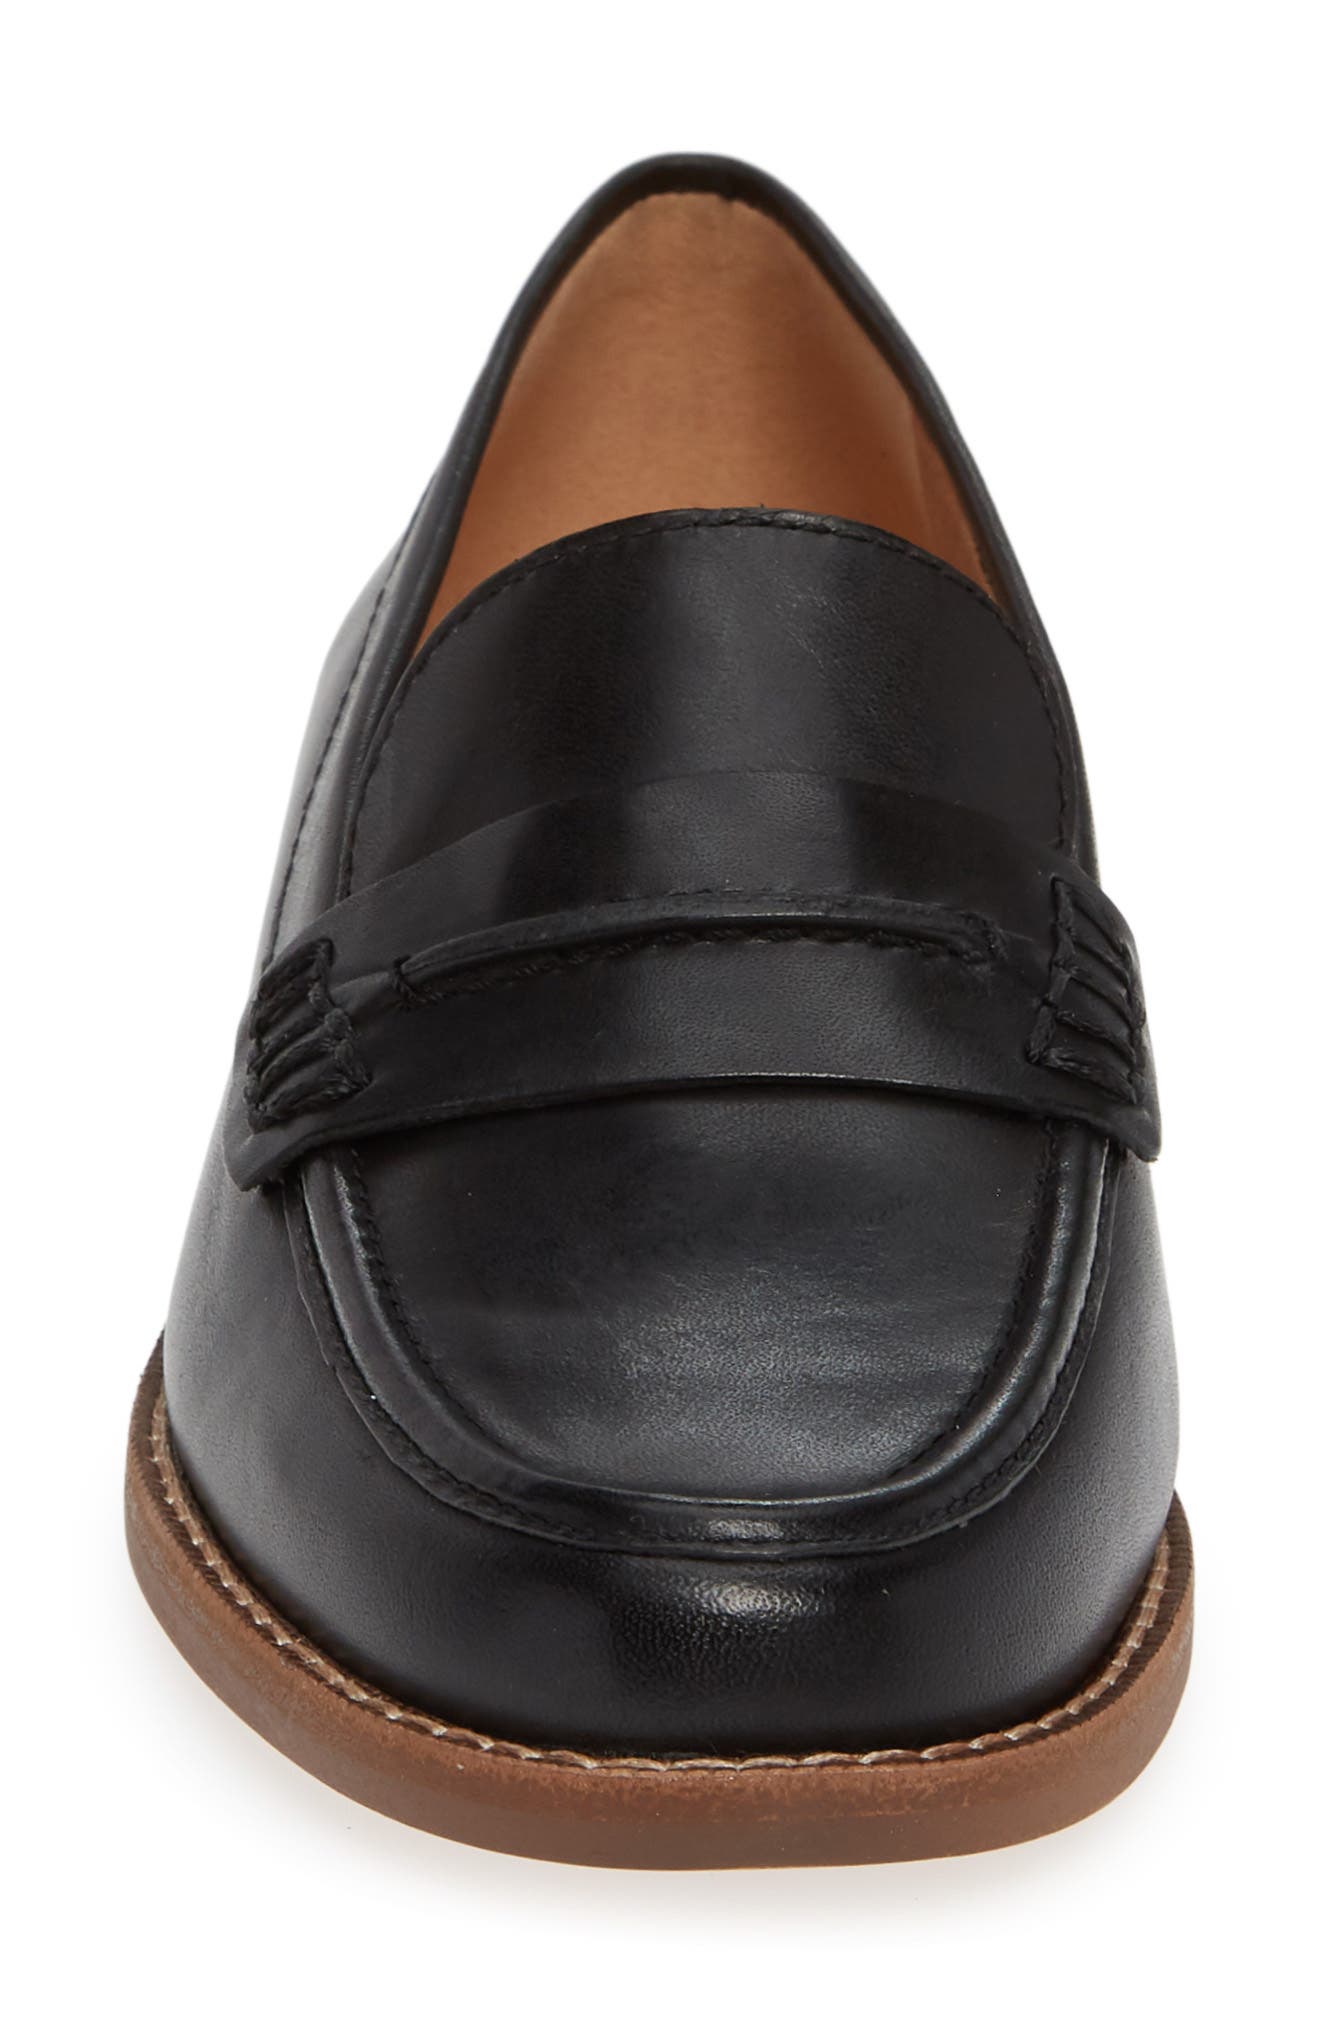 nordstrom madewell loafers